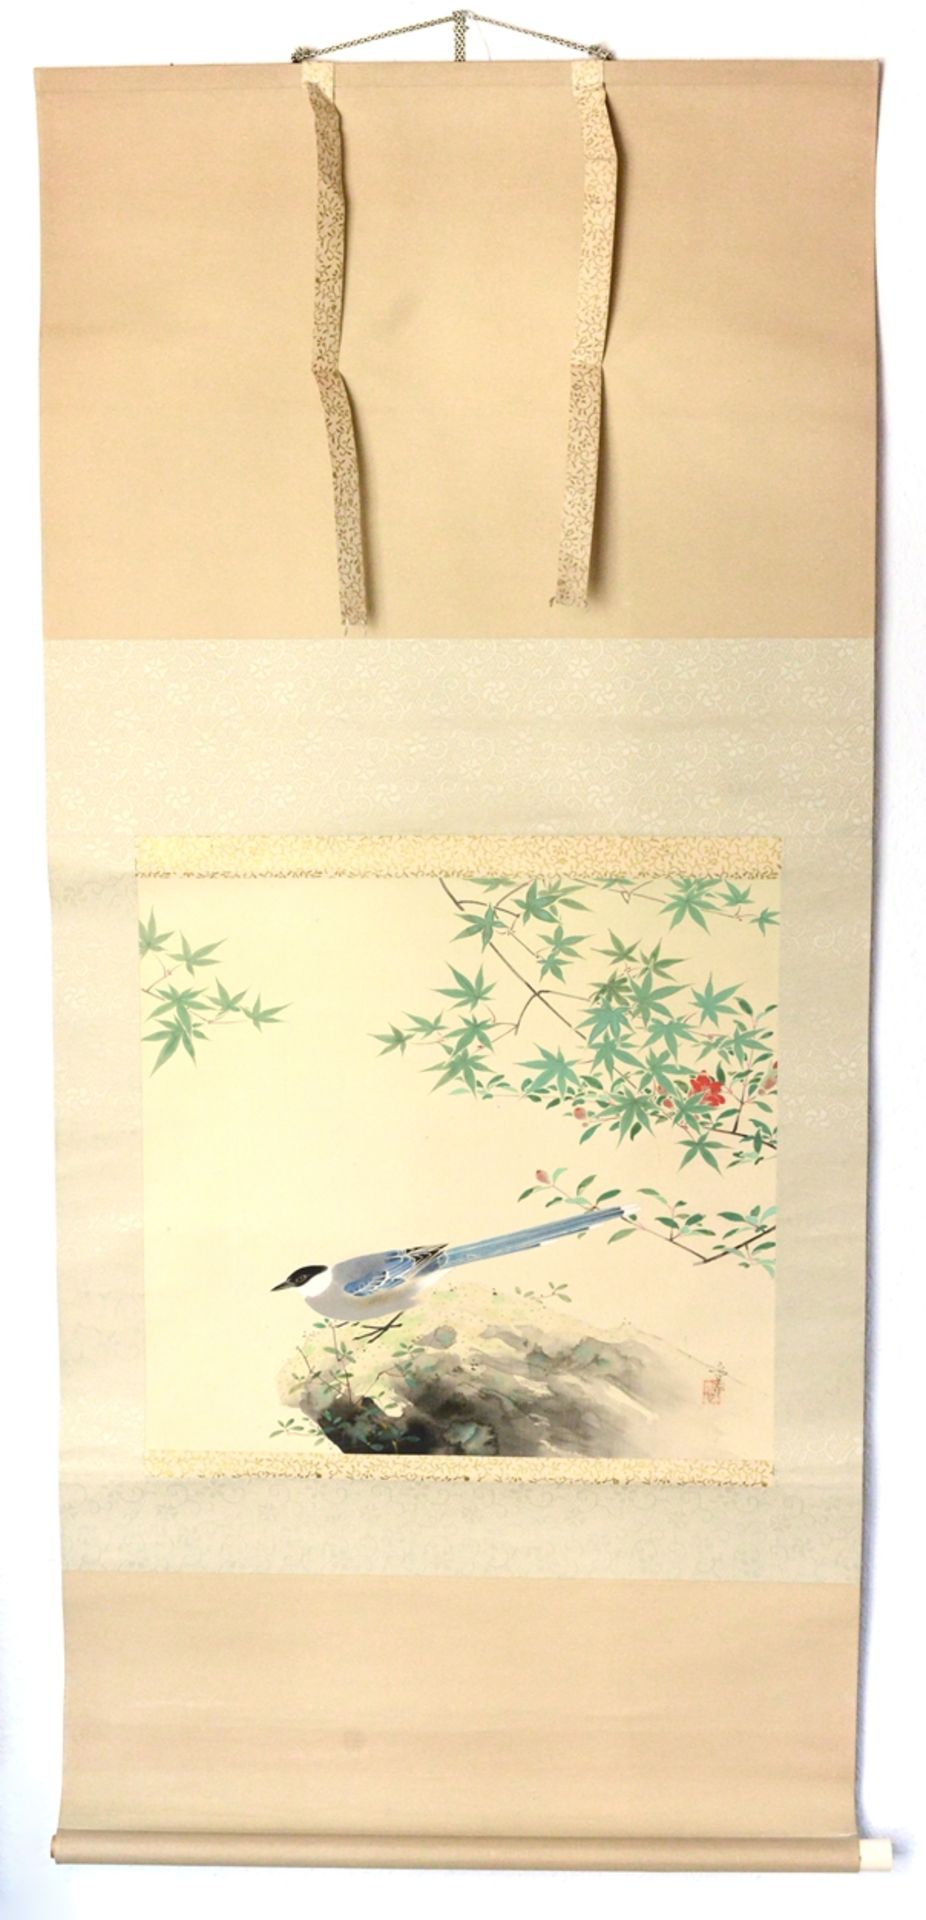 Hanging scroll, with blue star, above green star-shaped leaves with red flowers, ink on silk, fine 